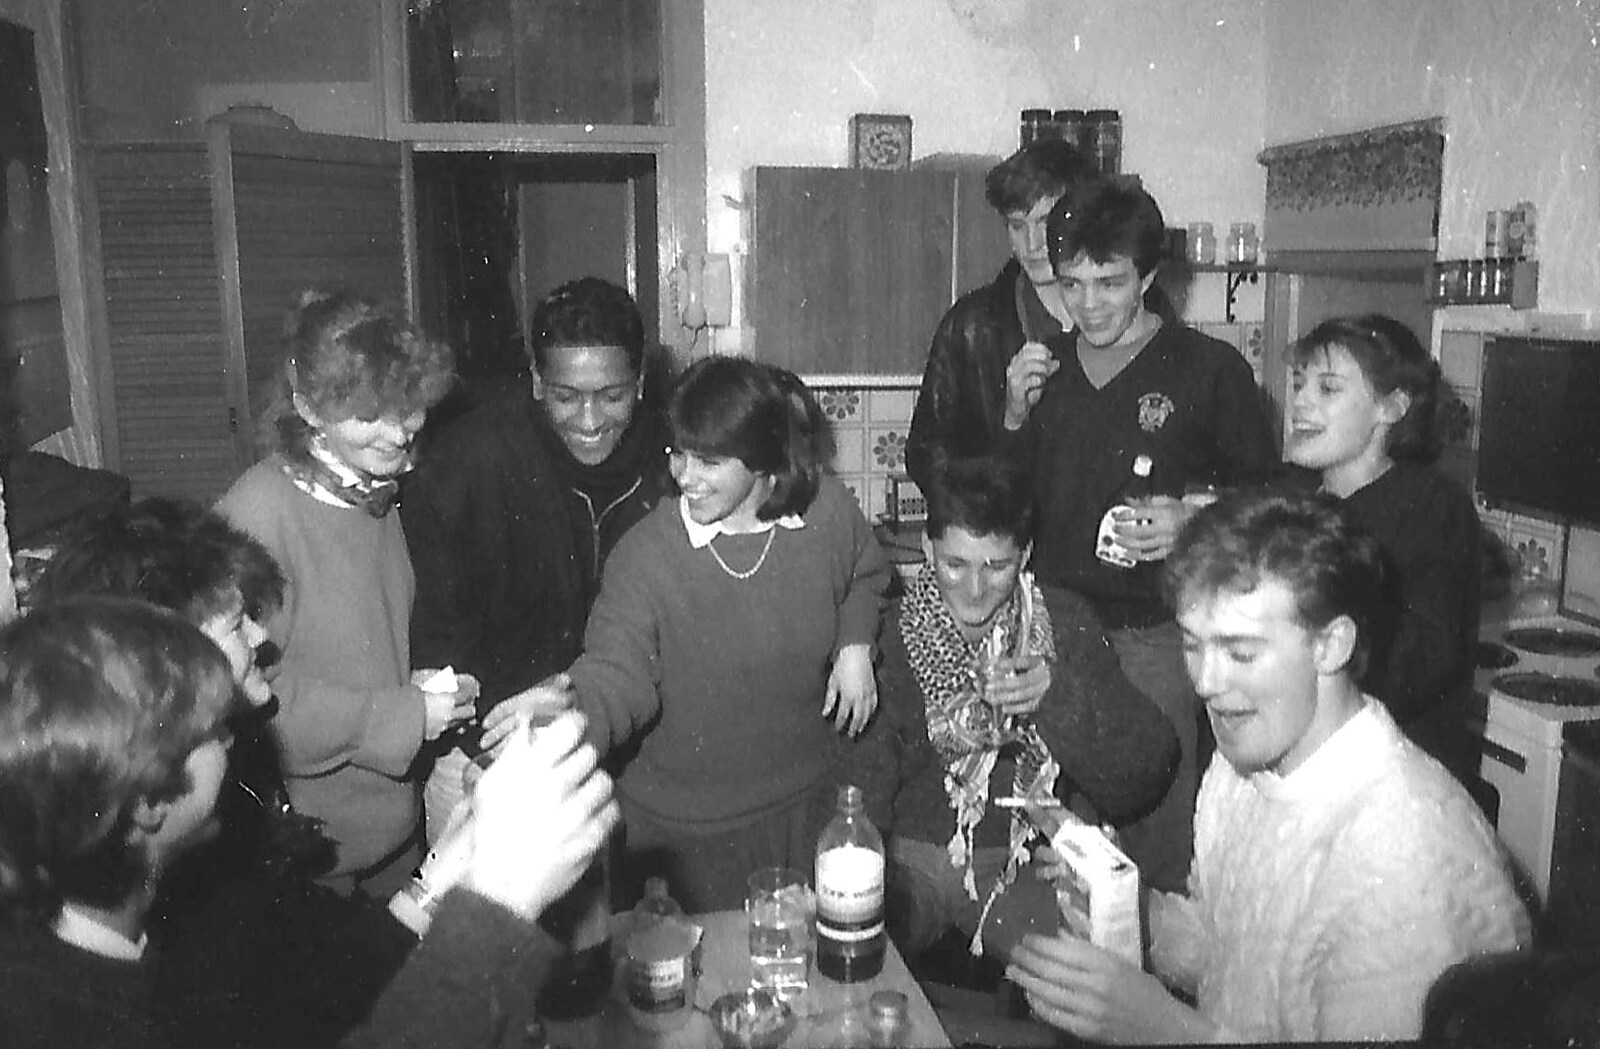 The test drinks are used for their intended purpose from Uni: The Plymouth Polytechnic Satique Project, Salcombe and Plymouth - 10th May 1986